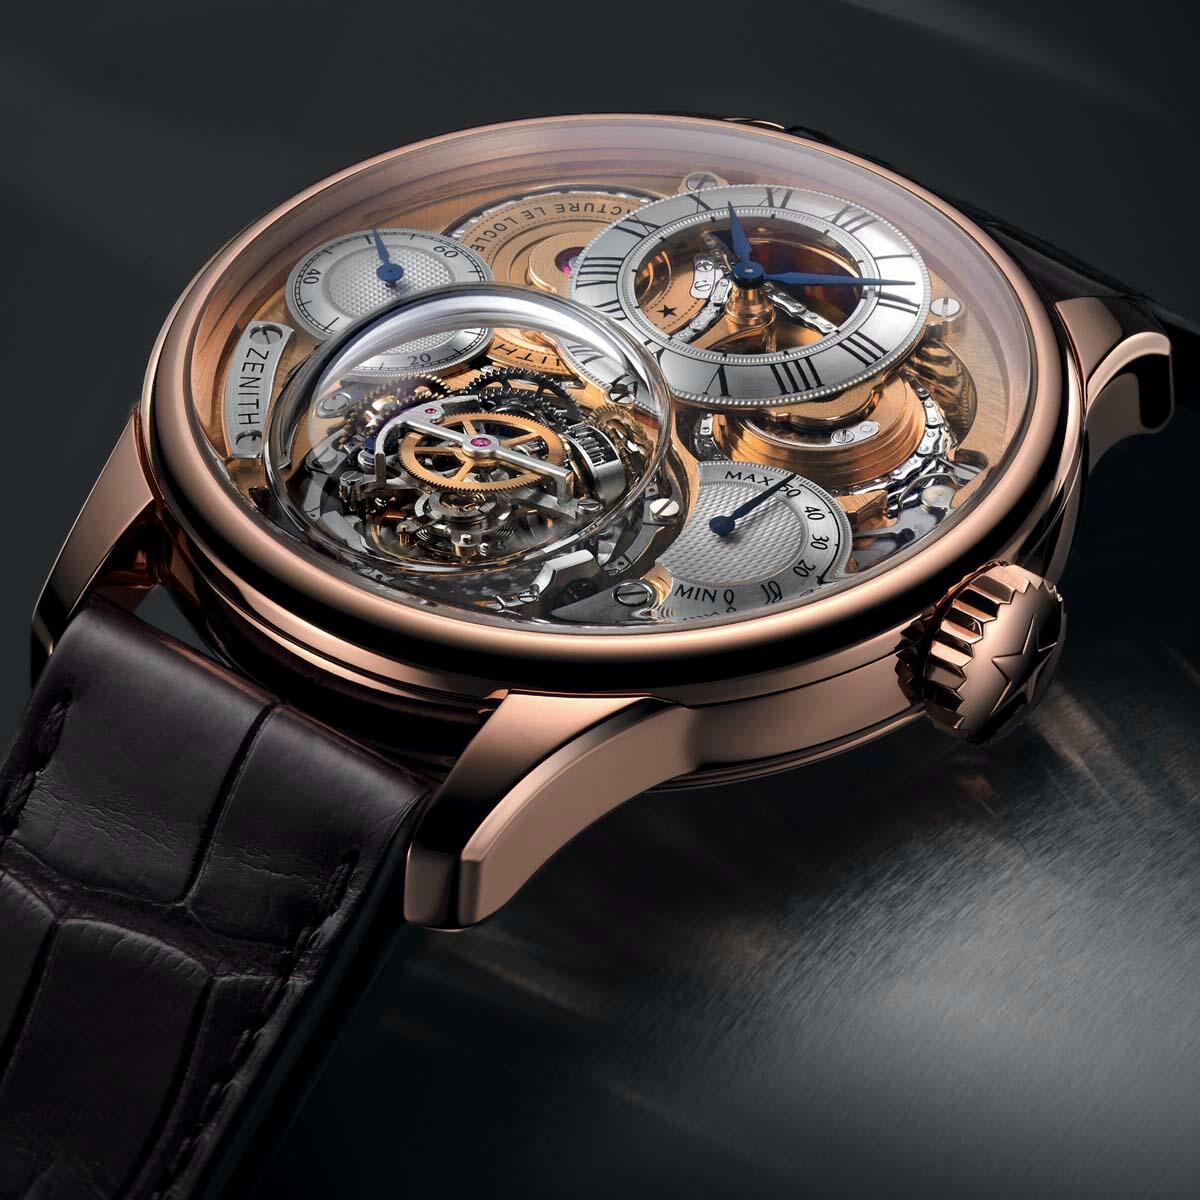 Zenith Academy Christophe Colomb Hurricane Watch - Unfinished Man